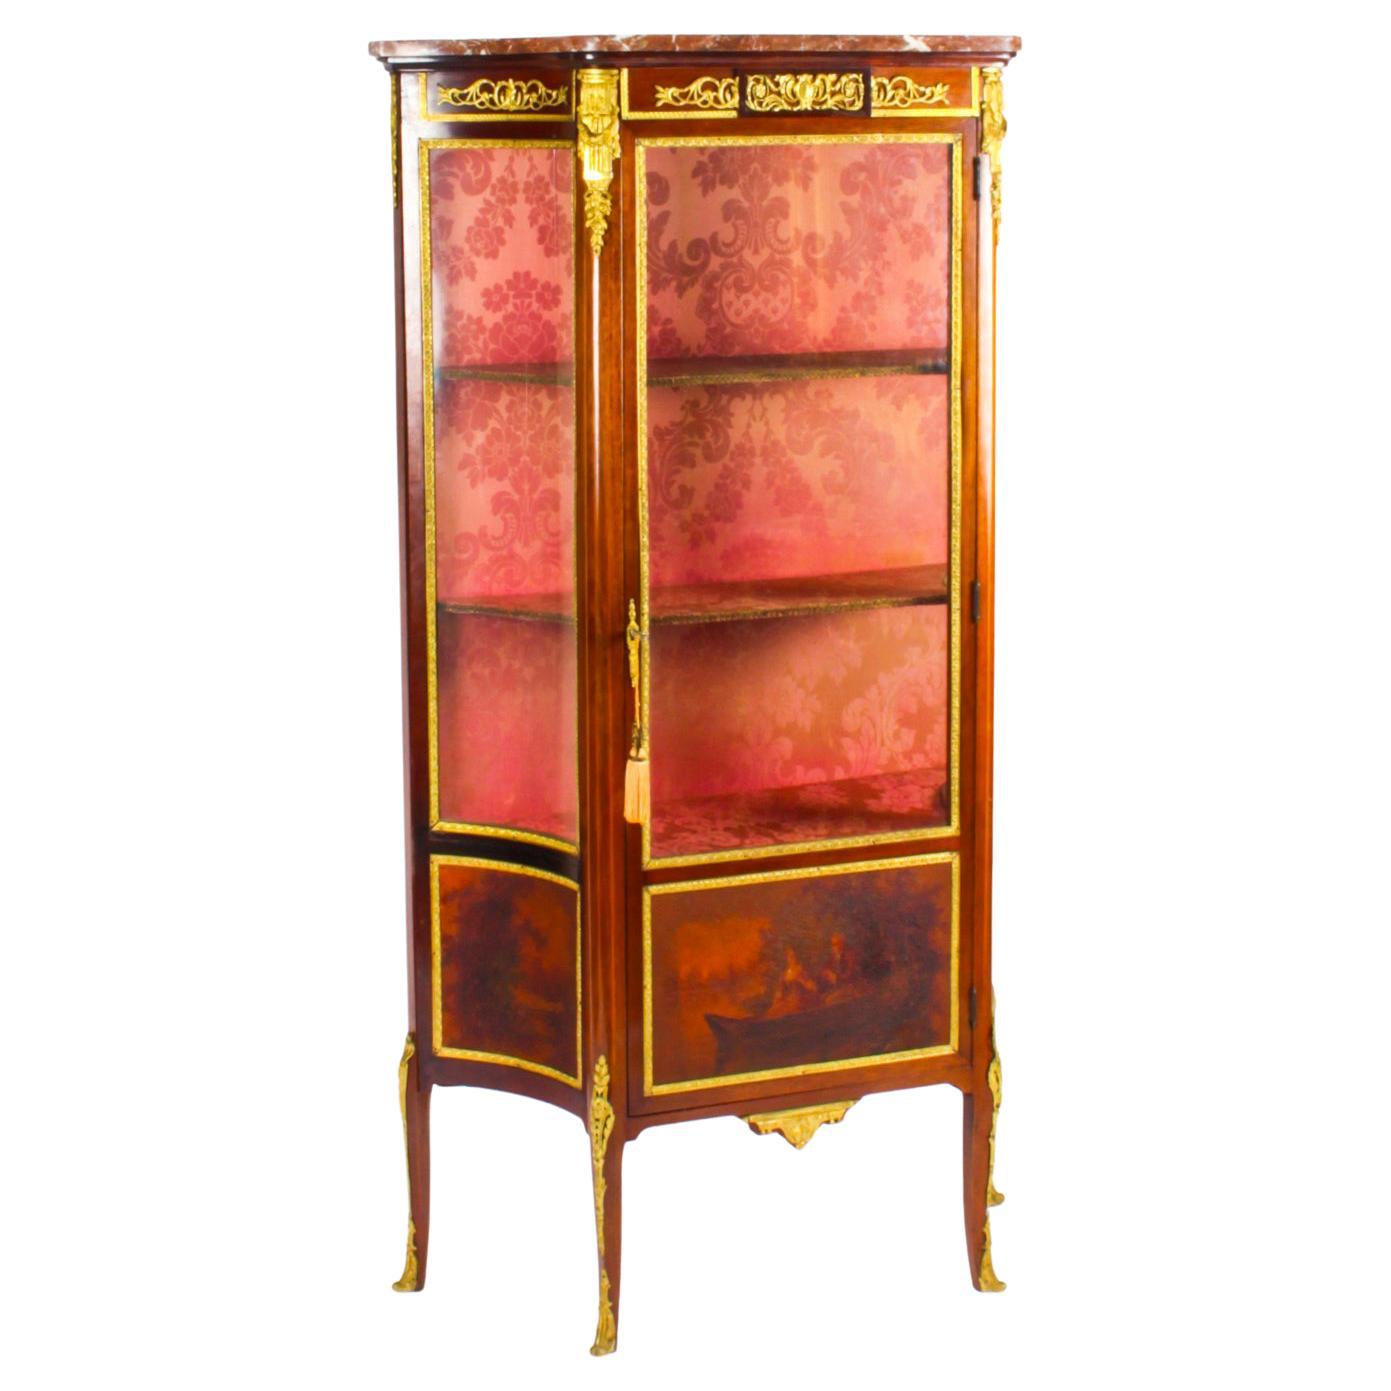 Antique French Vernis Martin Display Cabinet, 19th Century For Sale